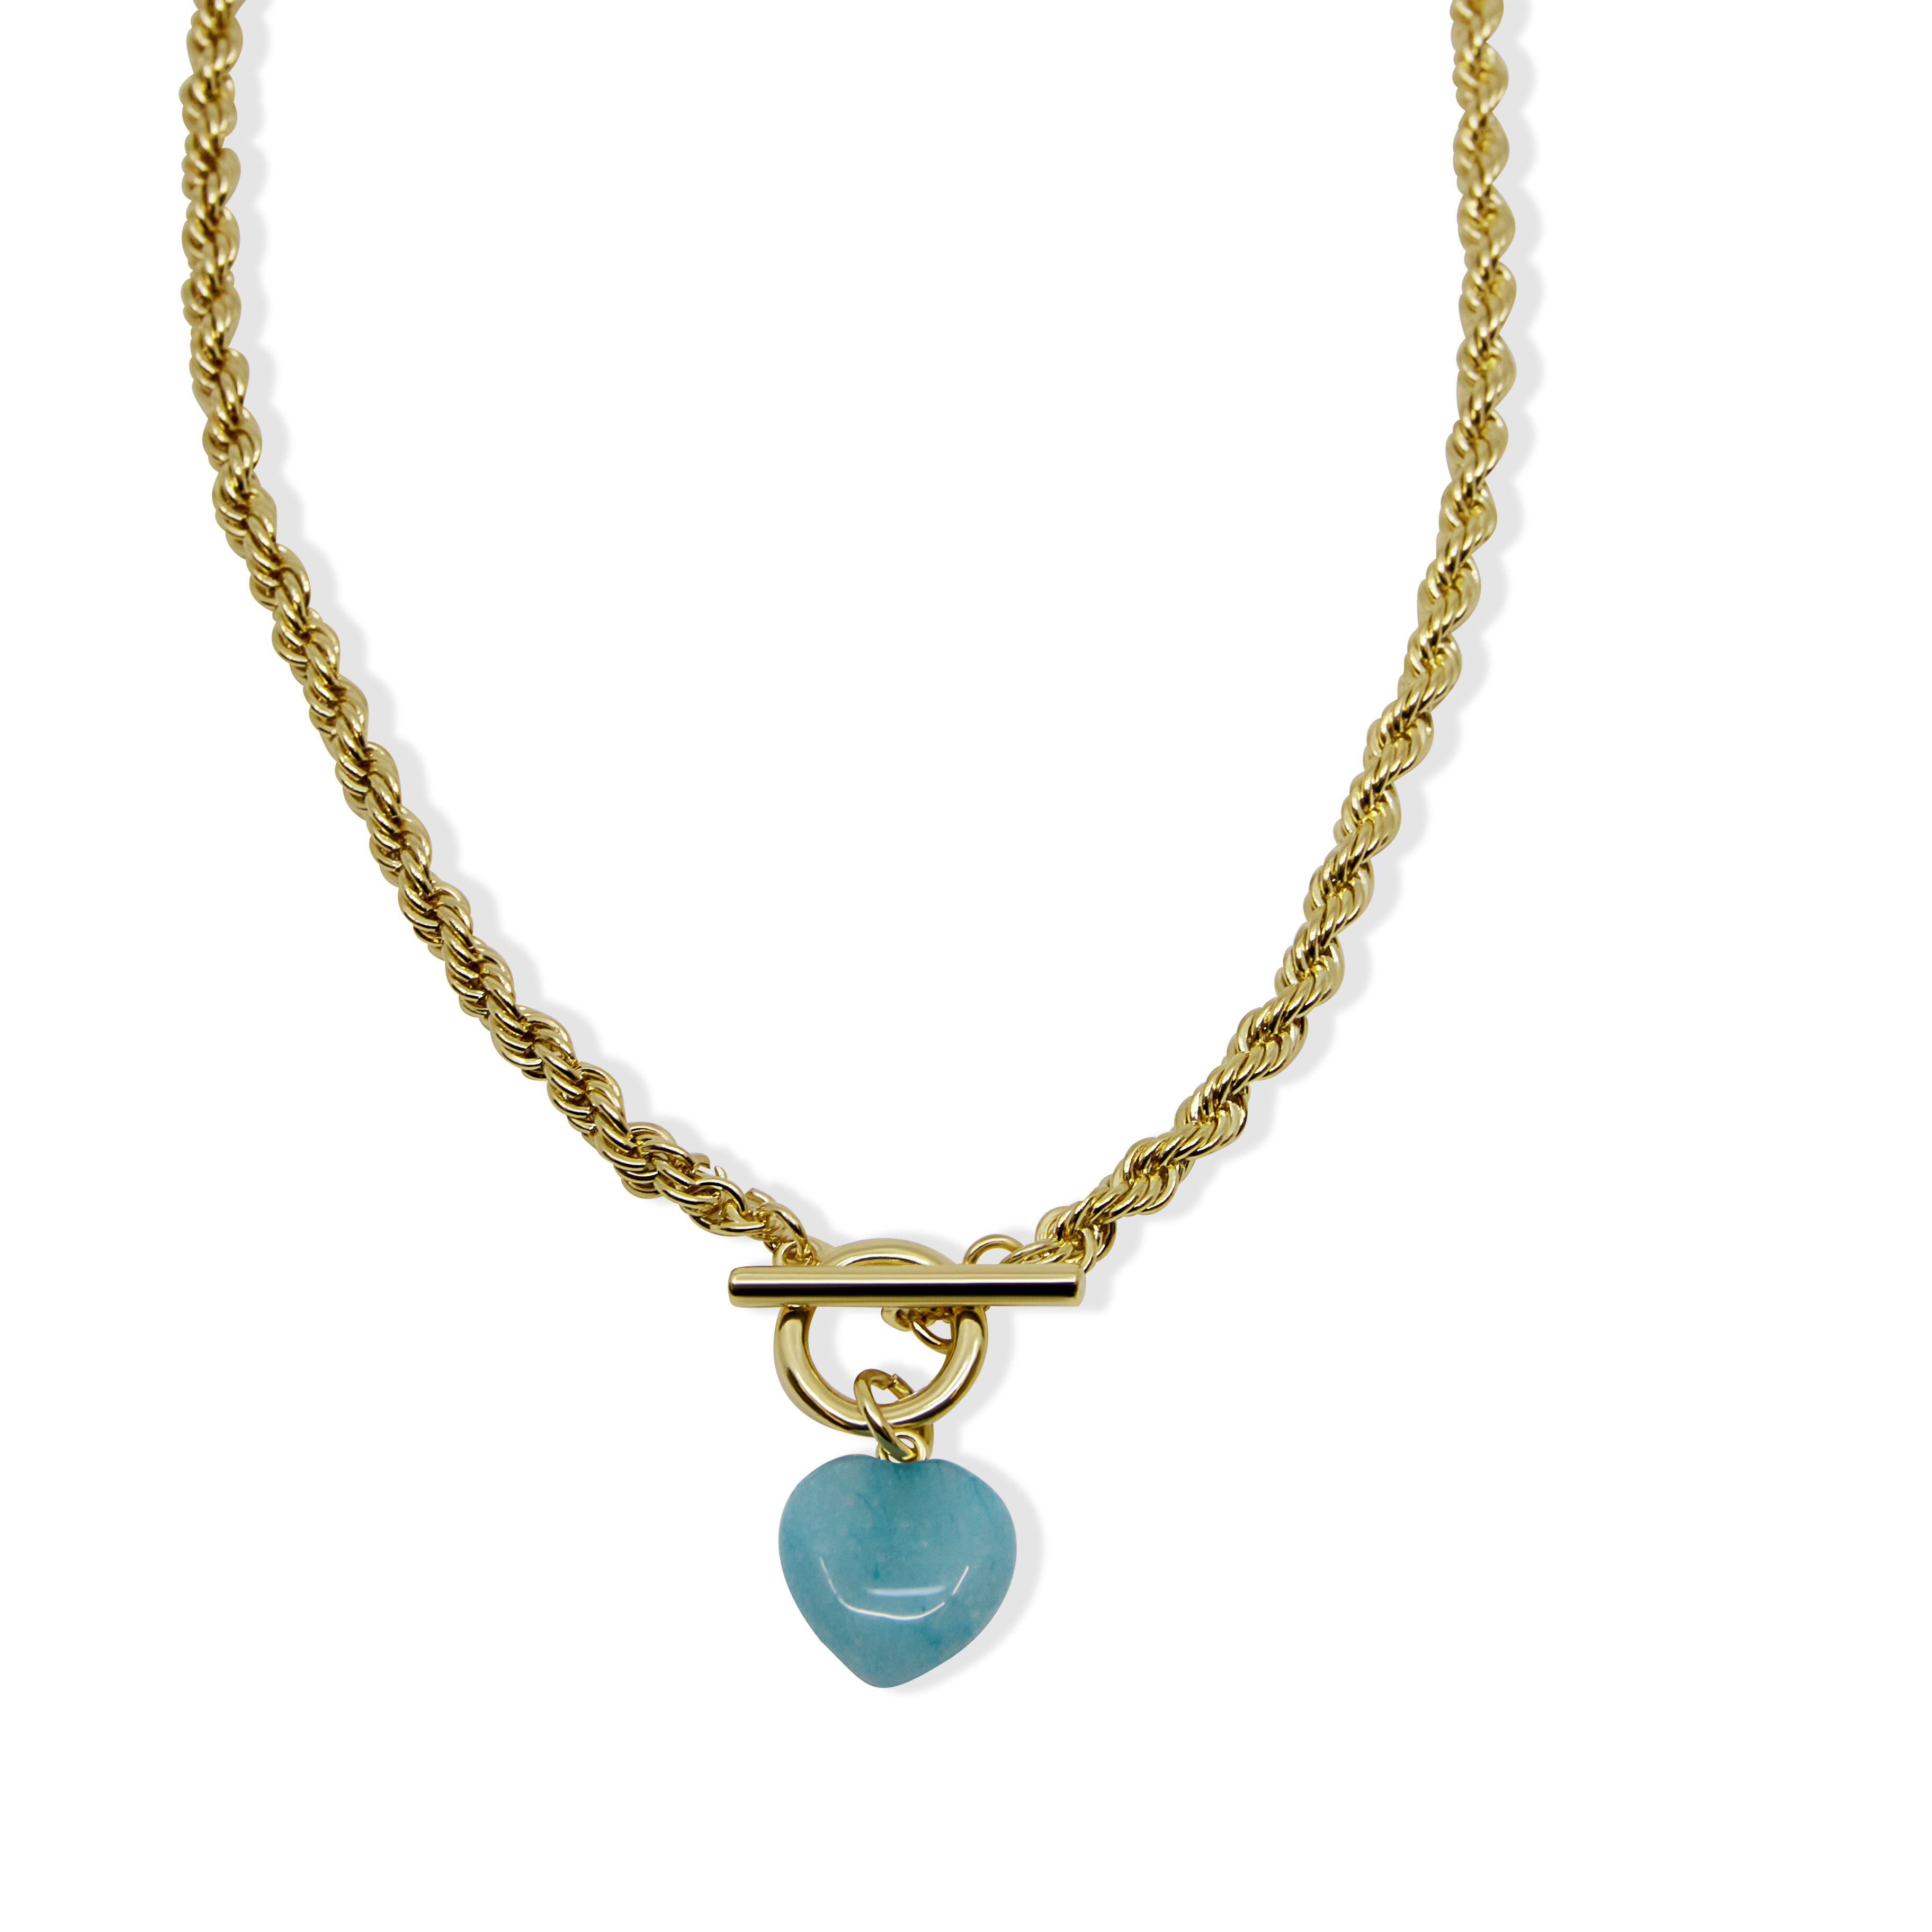 THE AQUA AMOUR ROPE NECKLACE